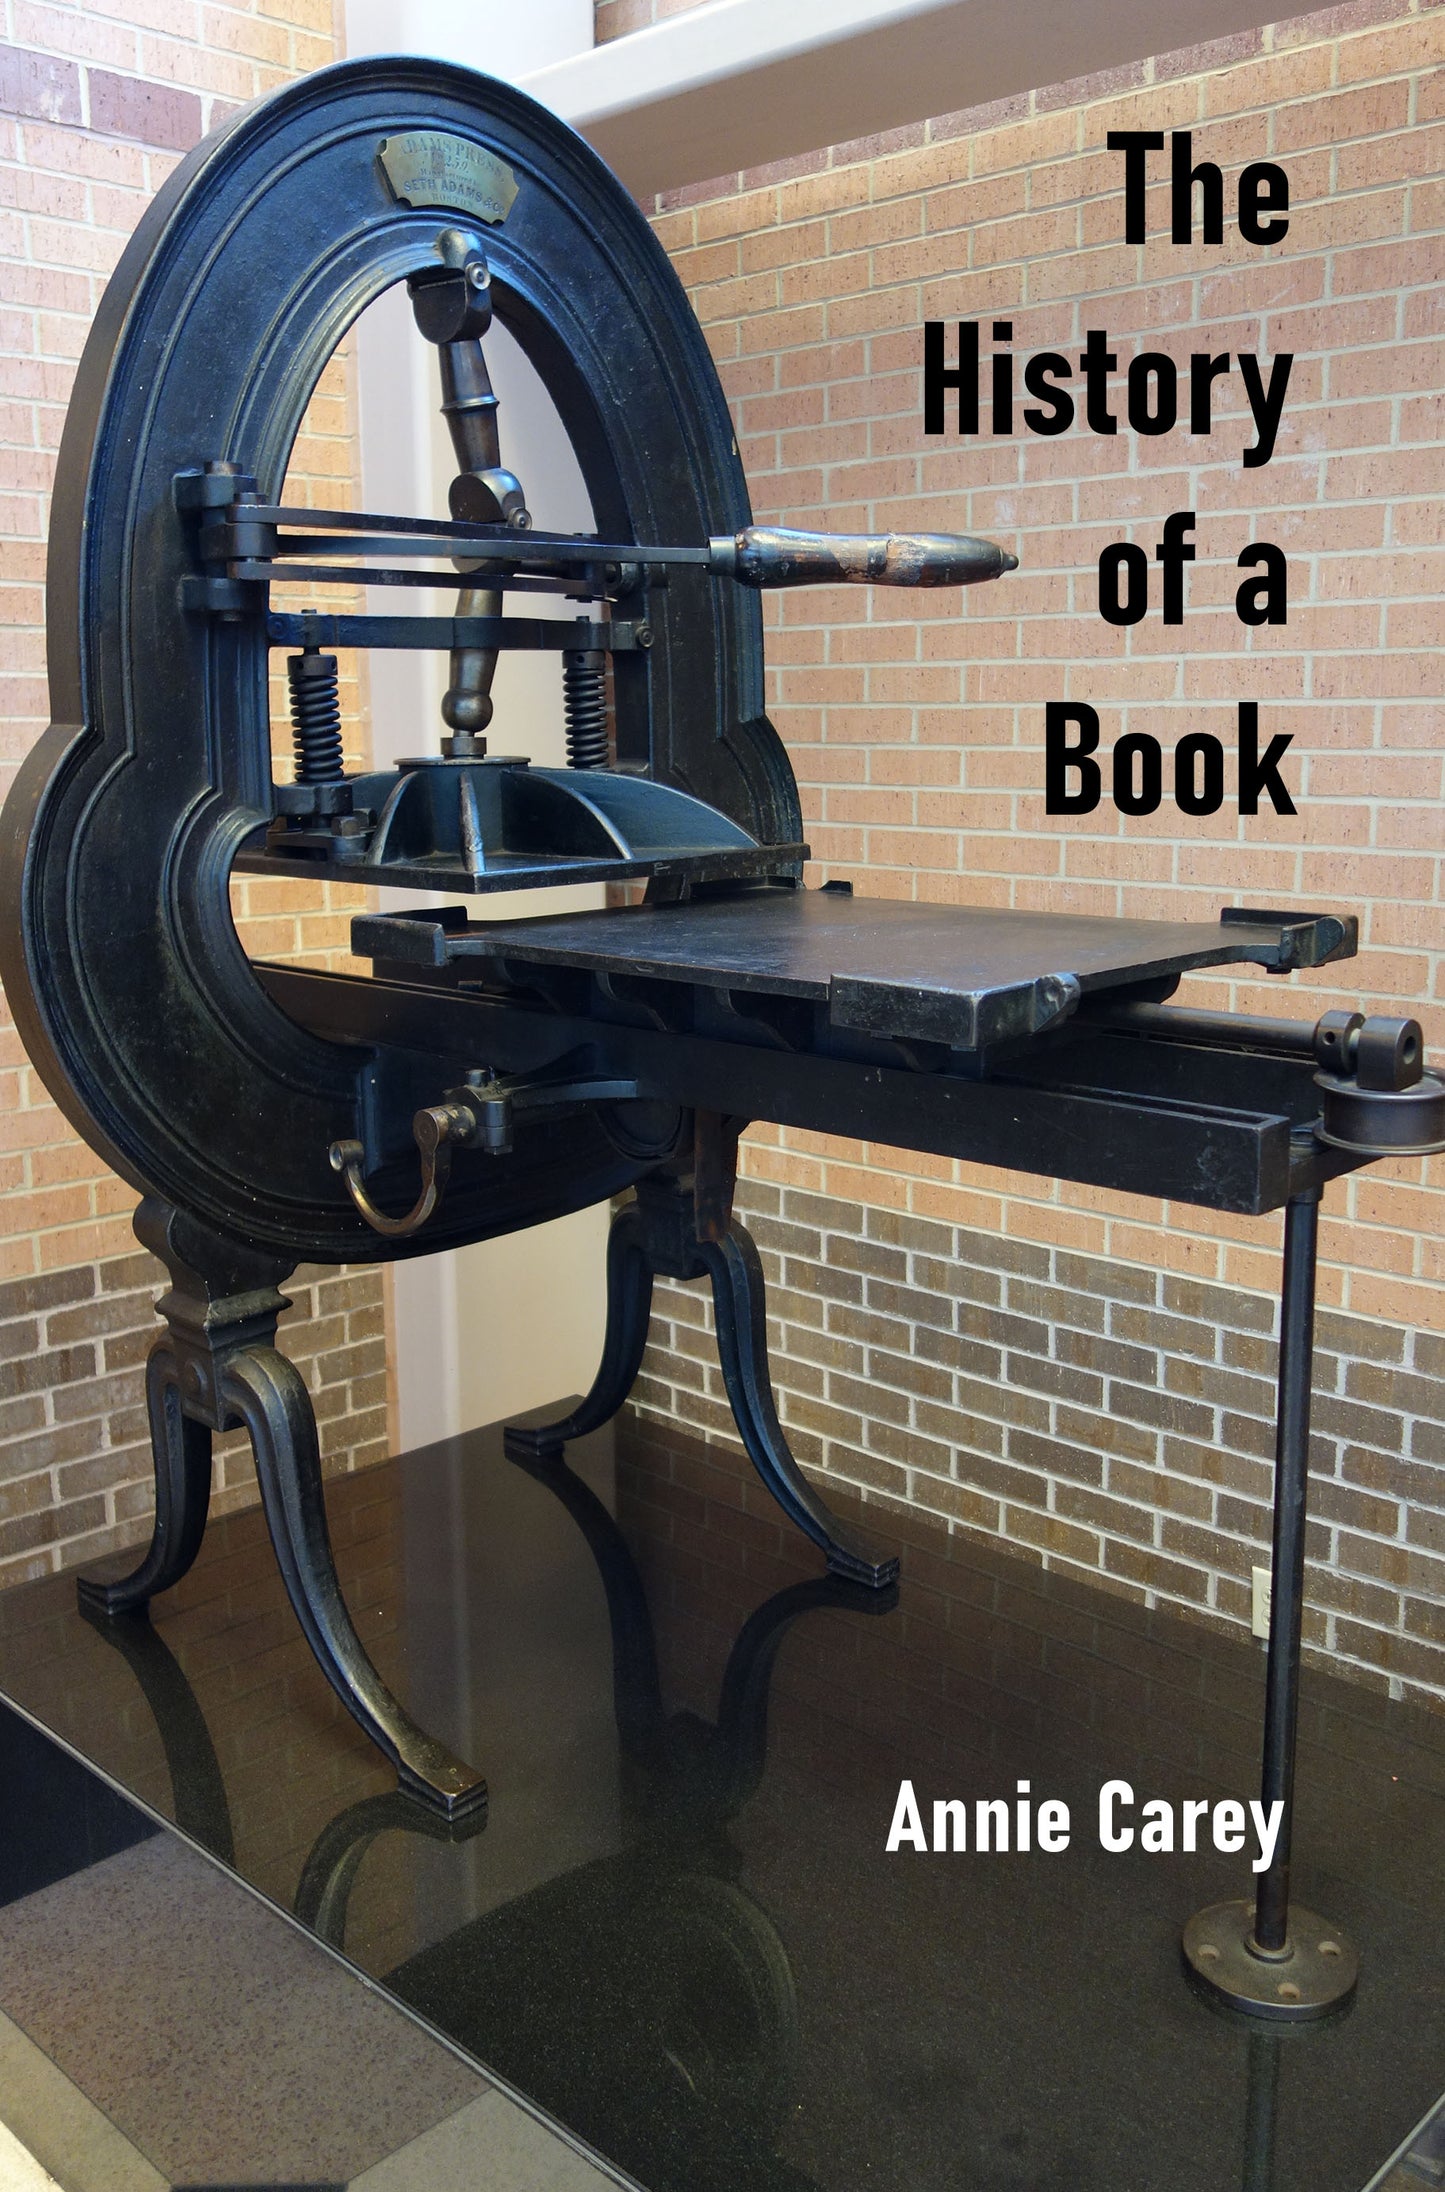 The History of a Book